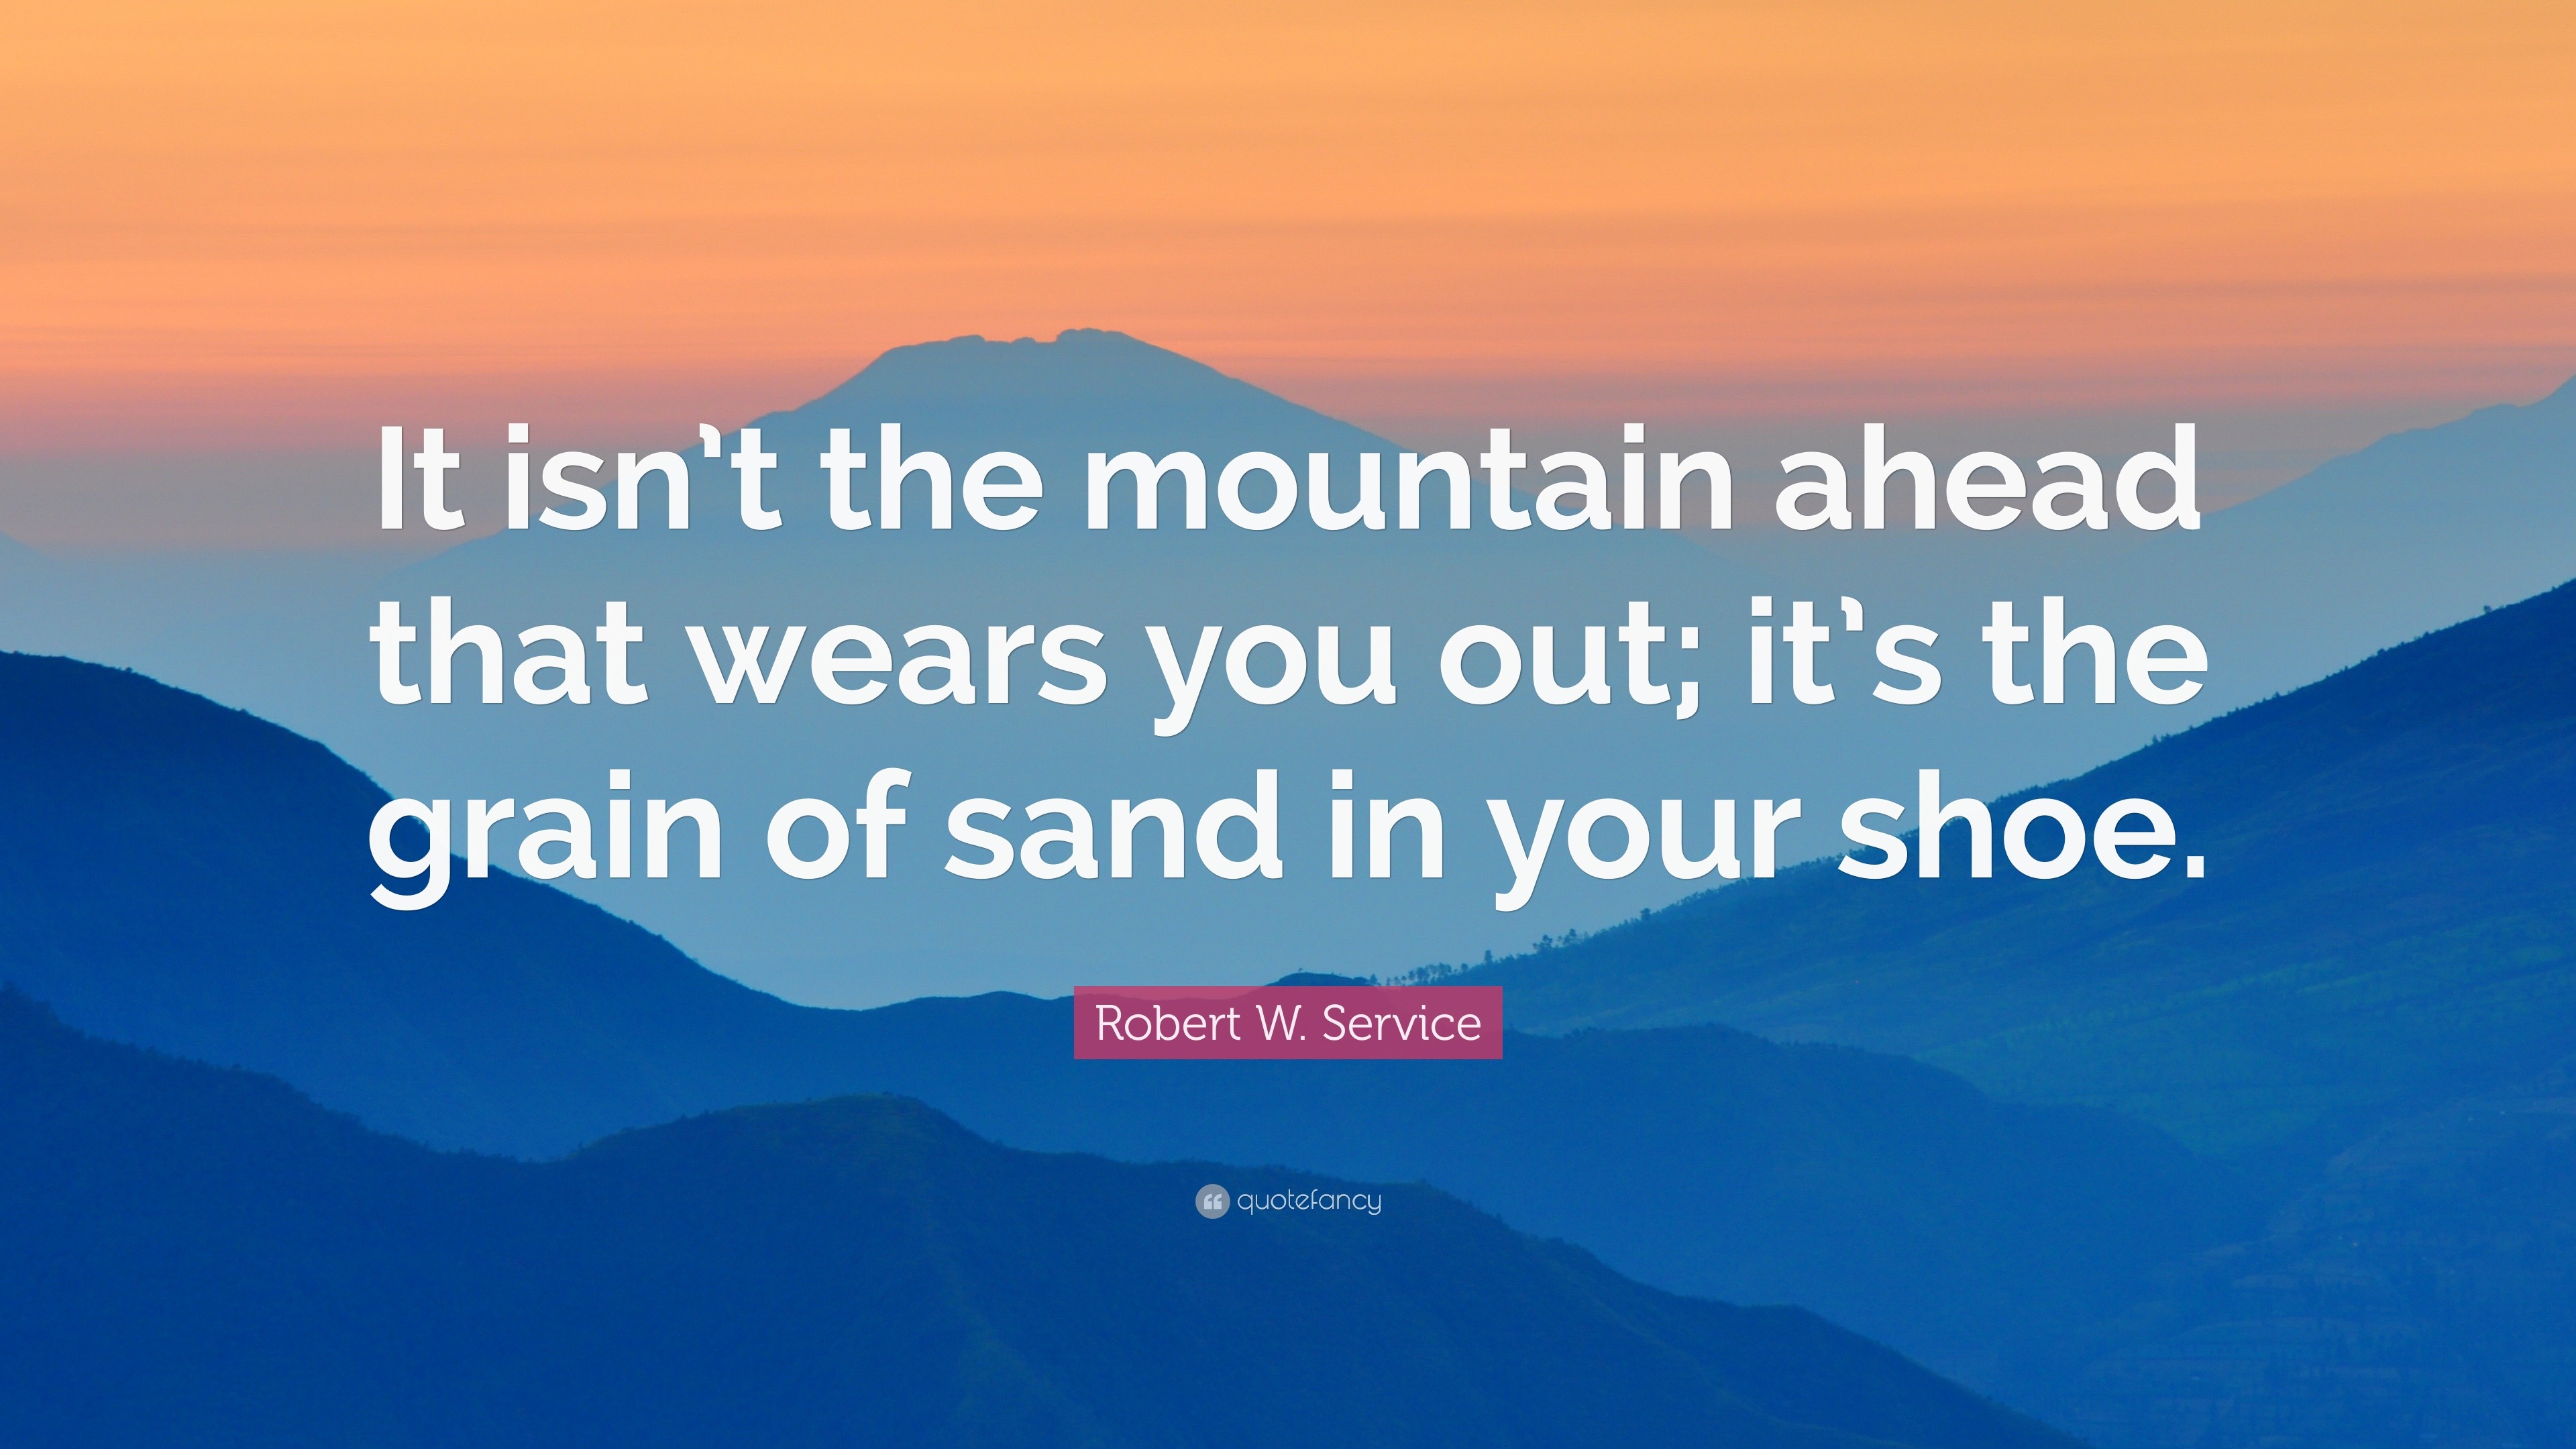 30512-Robert-W-Service-Quote-It-isn-t-the-mountain-ahead-that-wears-you.jpg